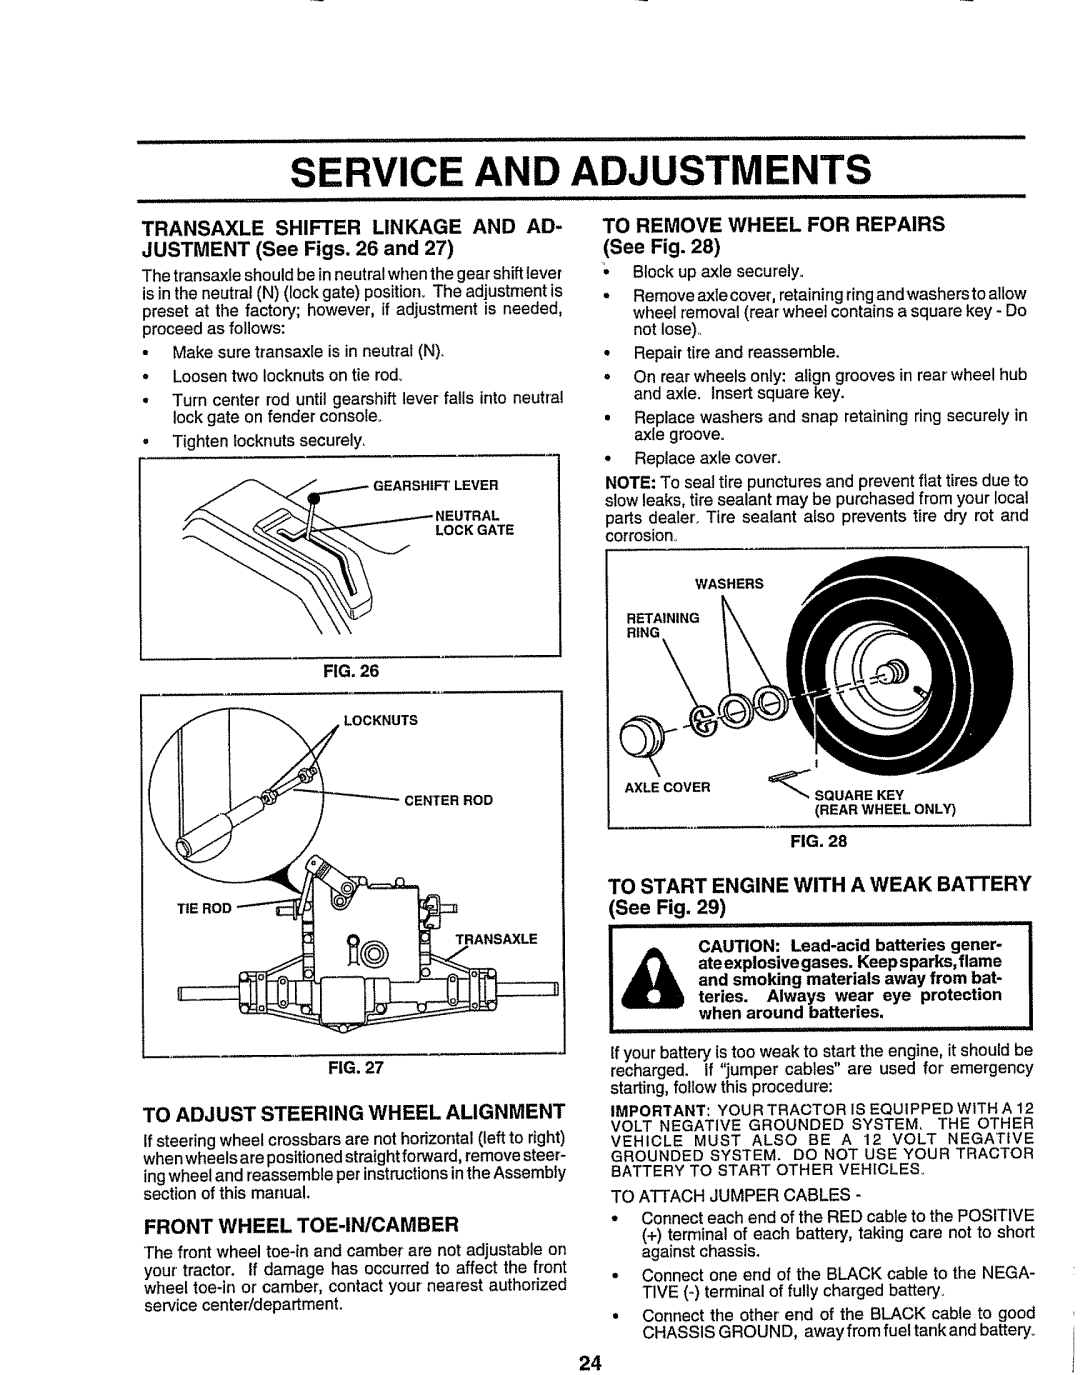 Sears 917.258473 owner manual And Adjustm, See Fig, To Remove Wheel For Repairs, To Adjust Steering Wheel Alignment 